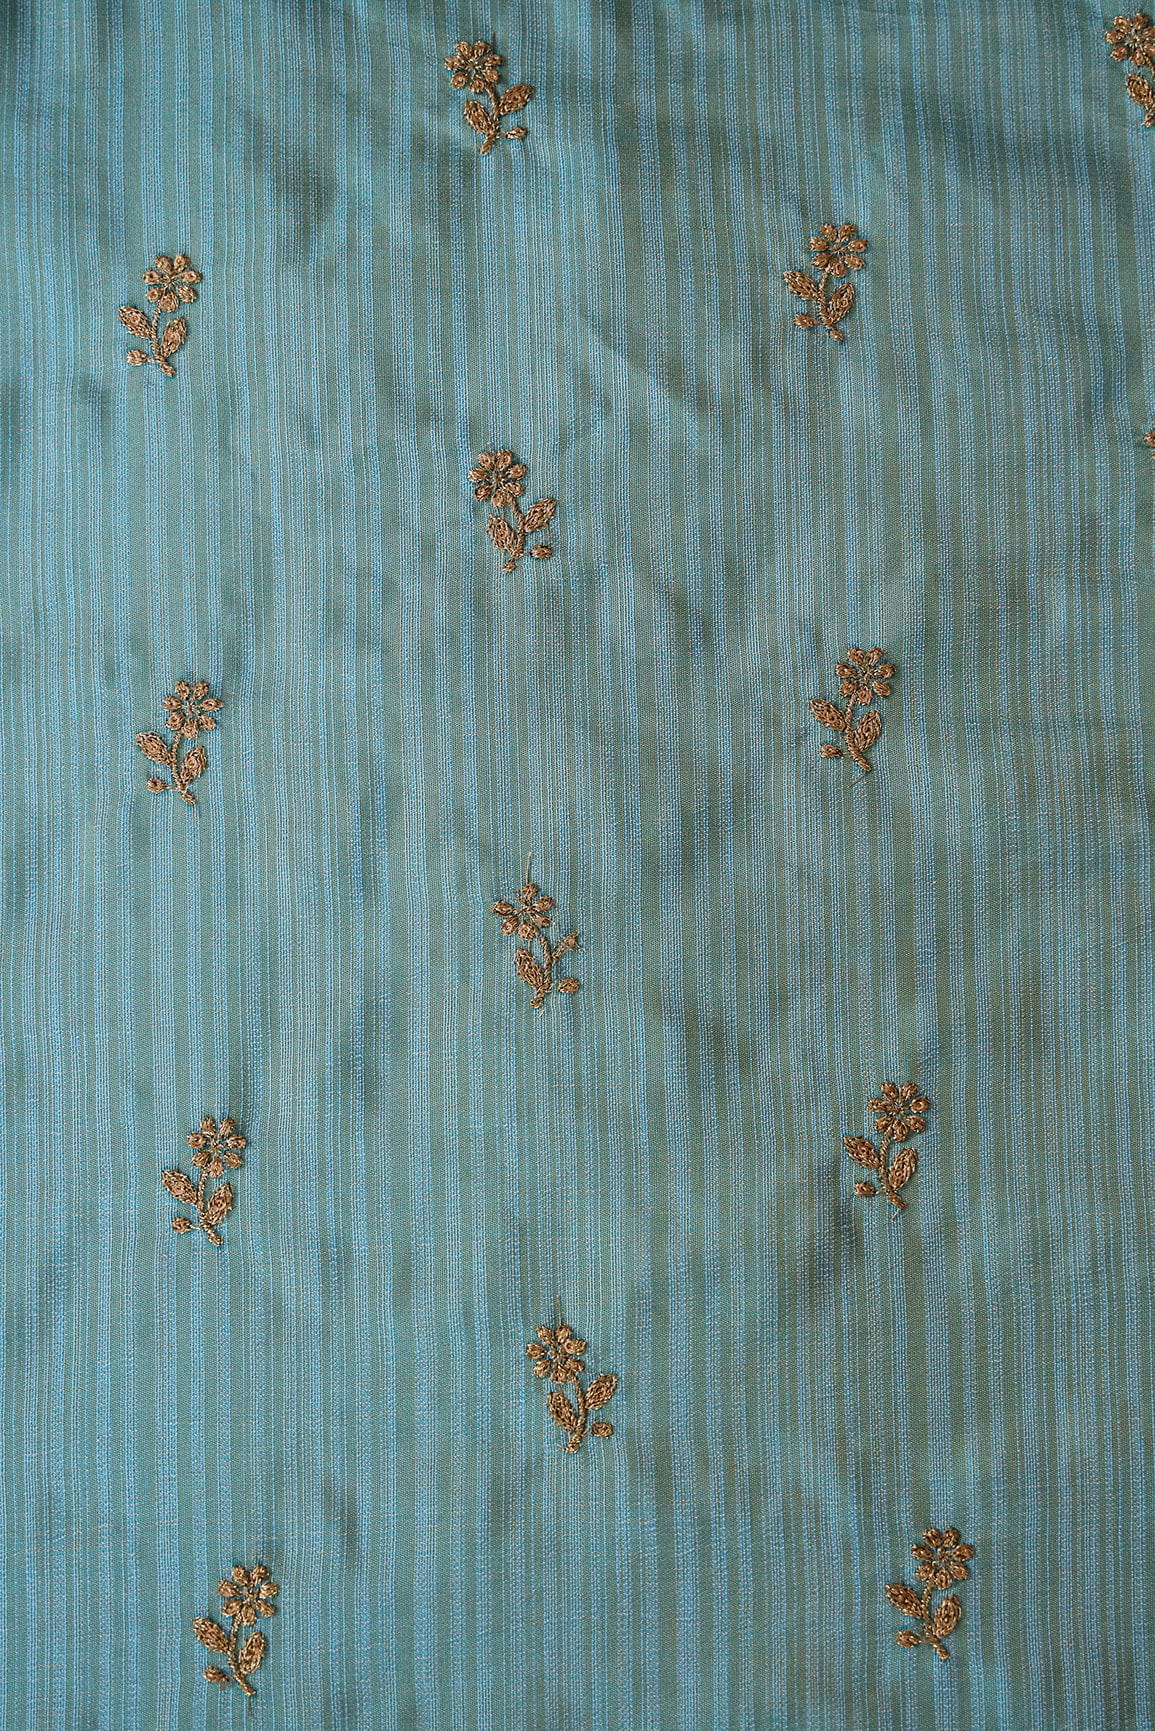 doeraa Embroidery Fabrics Gold Sequins with Zari Floral Embroidery On Sky Blue Bamboo Silk Fabric